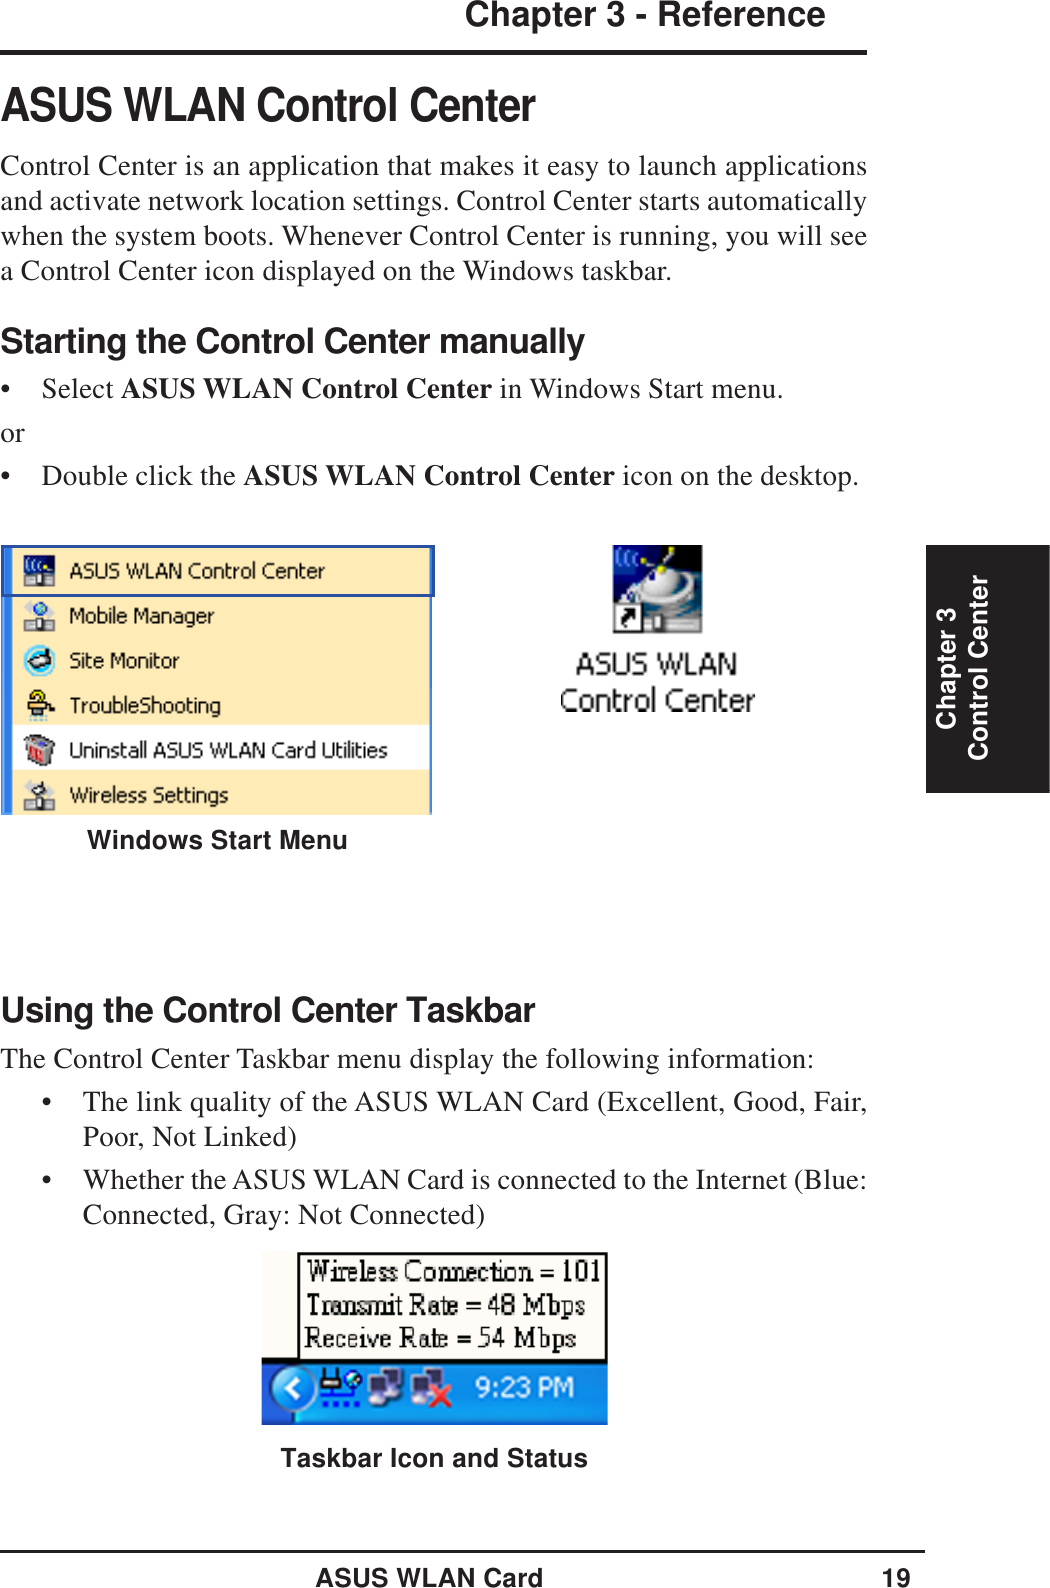 ASUS WLAN Card 19Chapter 3 - ReferenceChapter 3Control CenterASUS WLAN Control CenterControl Center is an application that makes it easy to launch applicationsand activate network location settings. Control Center starts automaticallywhen the system boots. Whenever Control Center is running, you will seea Control Center icon displayed on the Windows taskbar.Starting the Control Center manually• Select ASUS WLAN Control Center in Windows Start menu.or• Double click the ASUS WLAN Control Center icon on the desktop.Using the Control Center TaskbarThe Control Center Taskbar menu display the following information:• The link quality of the ASUS WLAN Card (Excellent, Good, Fair,Poor, Not Linked)• Whether the ASUS WLAN Card is connected to the Internet (Blue:Connected, Gray: Not Connected)Taskbar Icon and StatusWindows Start Menu